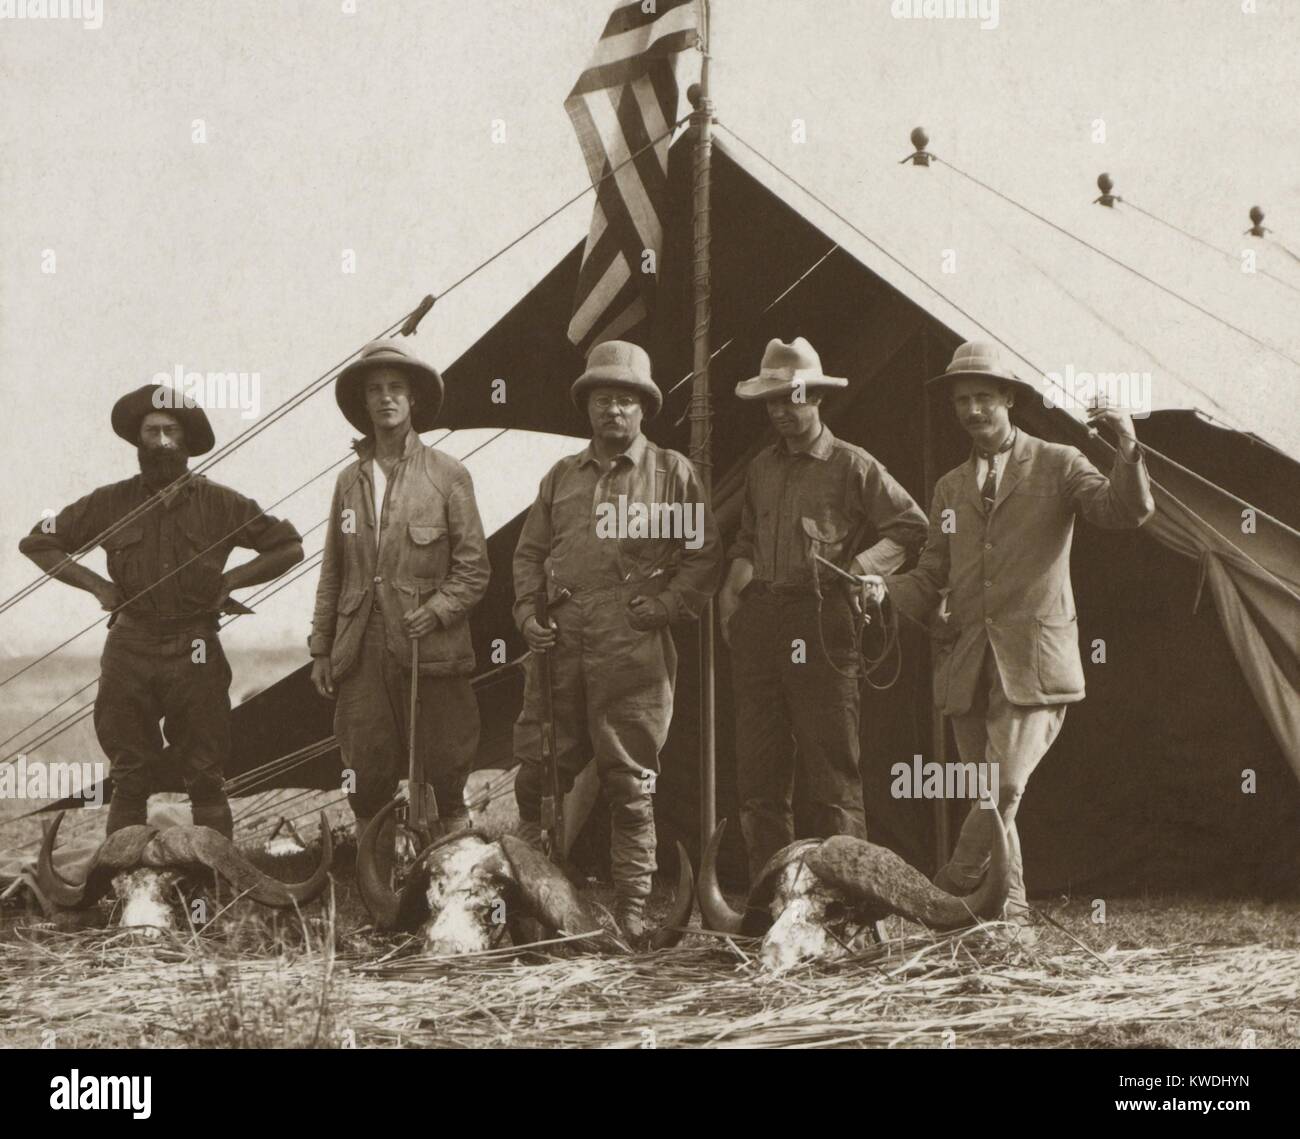 Members of Theodore Roosevelts safari stands behind African buffalo skulls. Standing in front of a tent, L-R: R. J. Cunninghame, Kermit Roosevelt, Theodore Roosevelt, Edmund Heller, and Hugh H. Heatley. Smithsonian-Roosevelt African Expedition, July 1909-Feb. 1910 (BSLOC 2017 8 14) Stock Photo